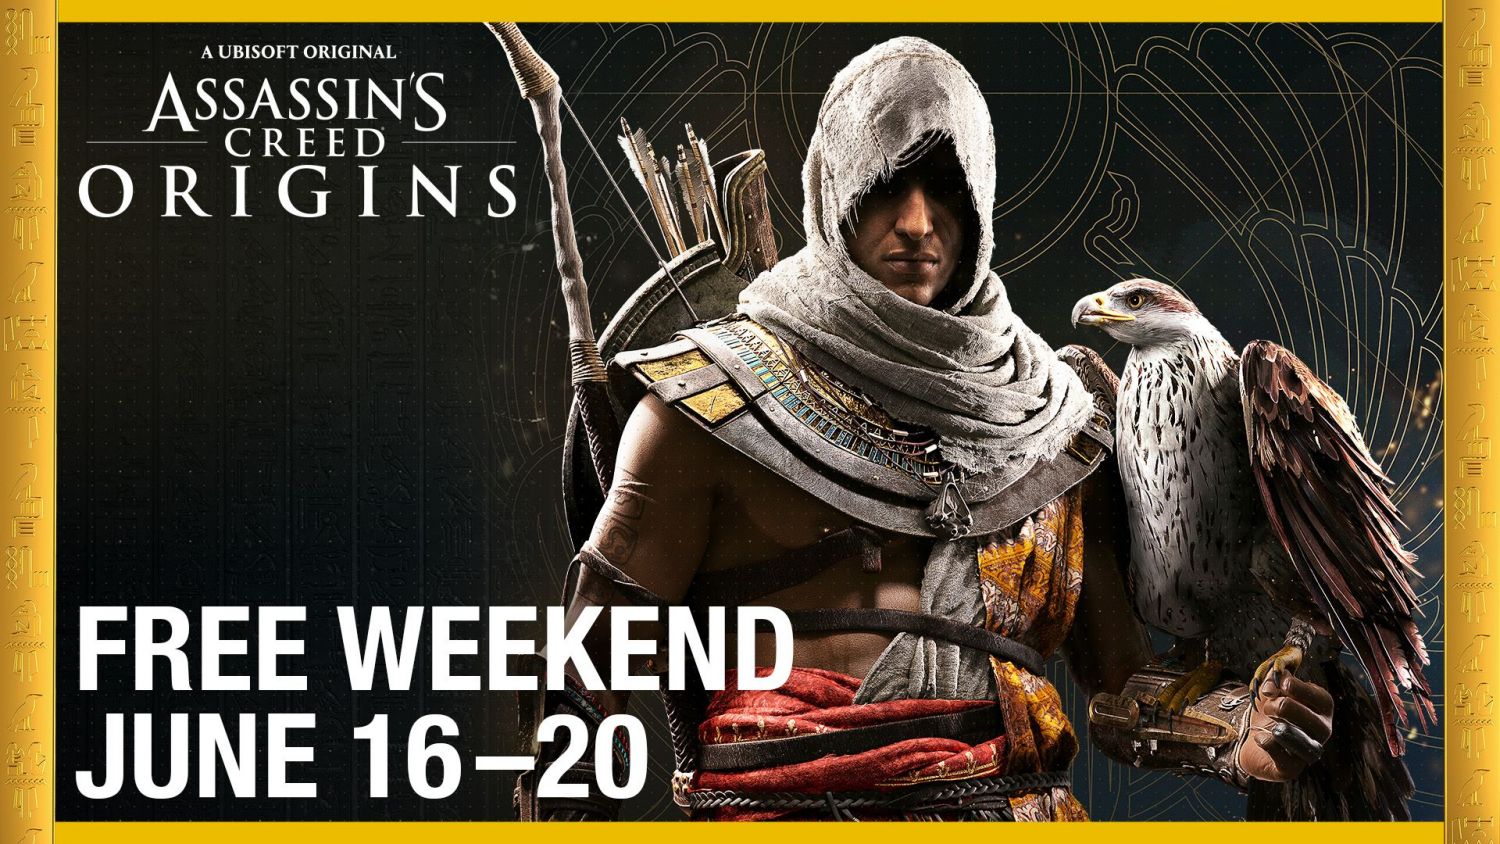 Assassin's Creed 15th Anniversary - Origins Free Weekend